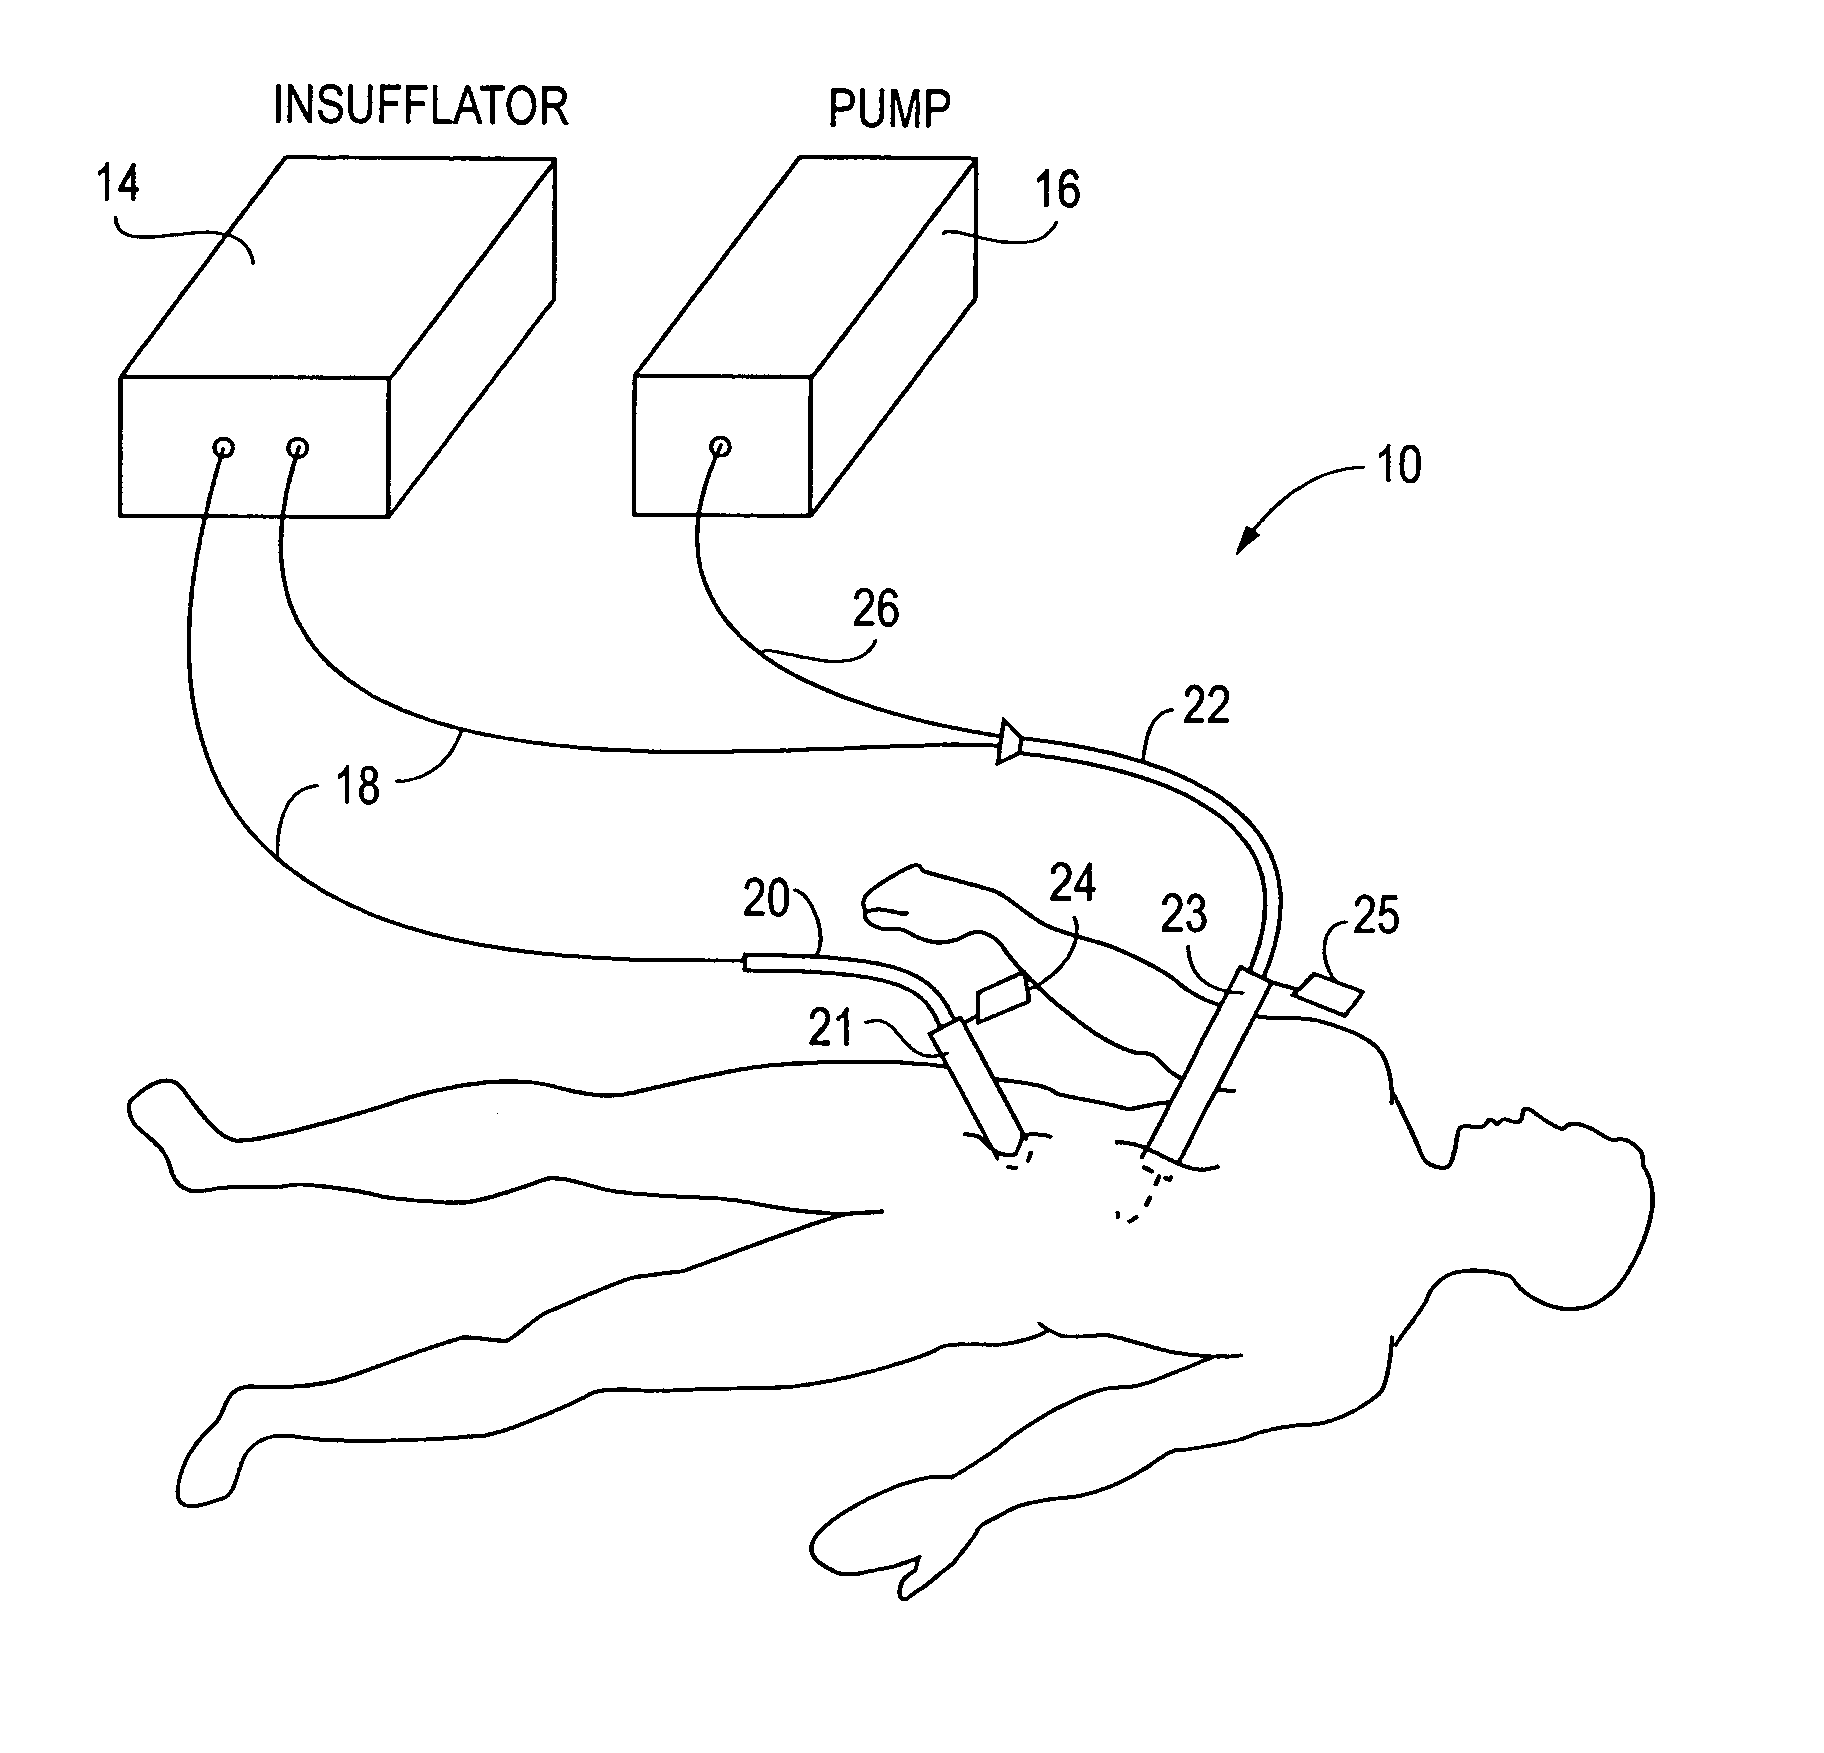 System and method for delivering a substance to a body cavity